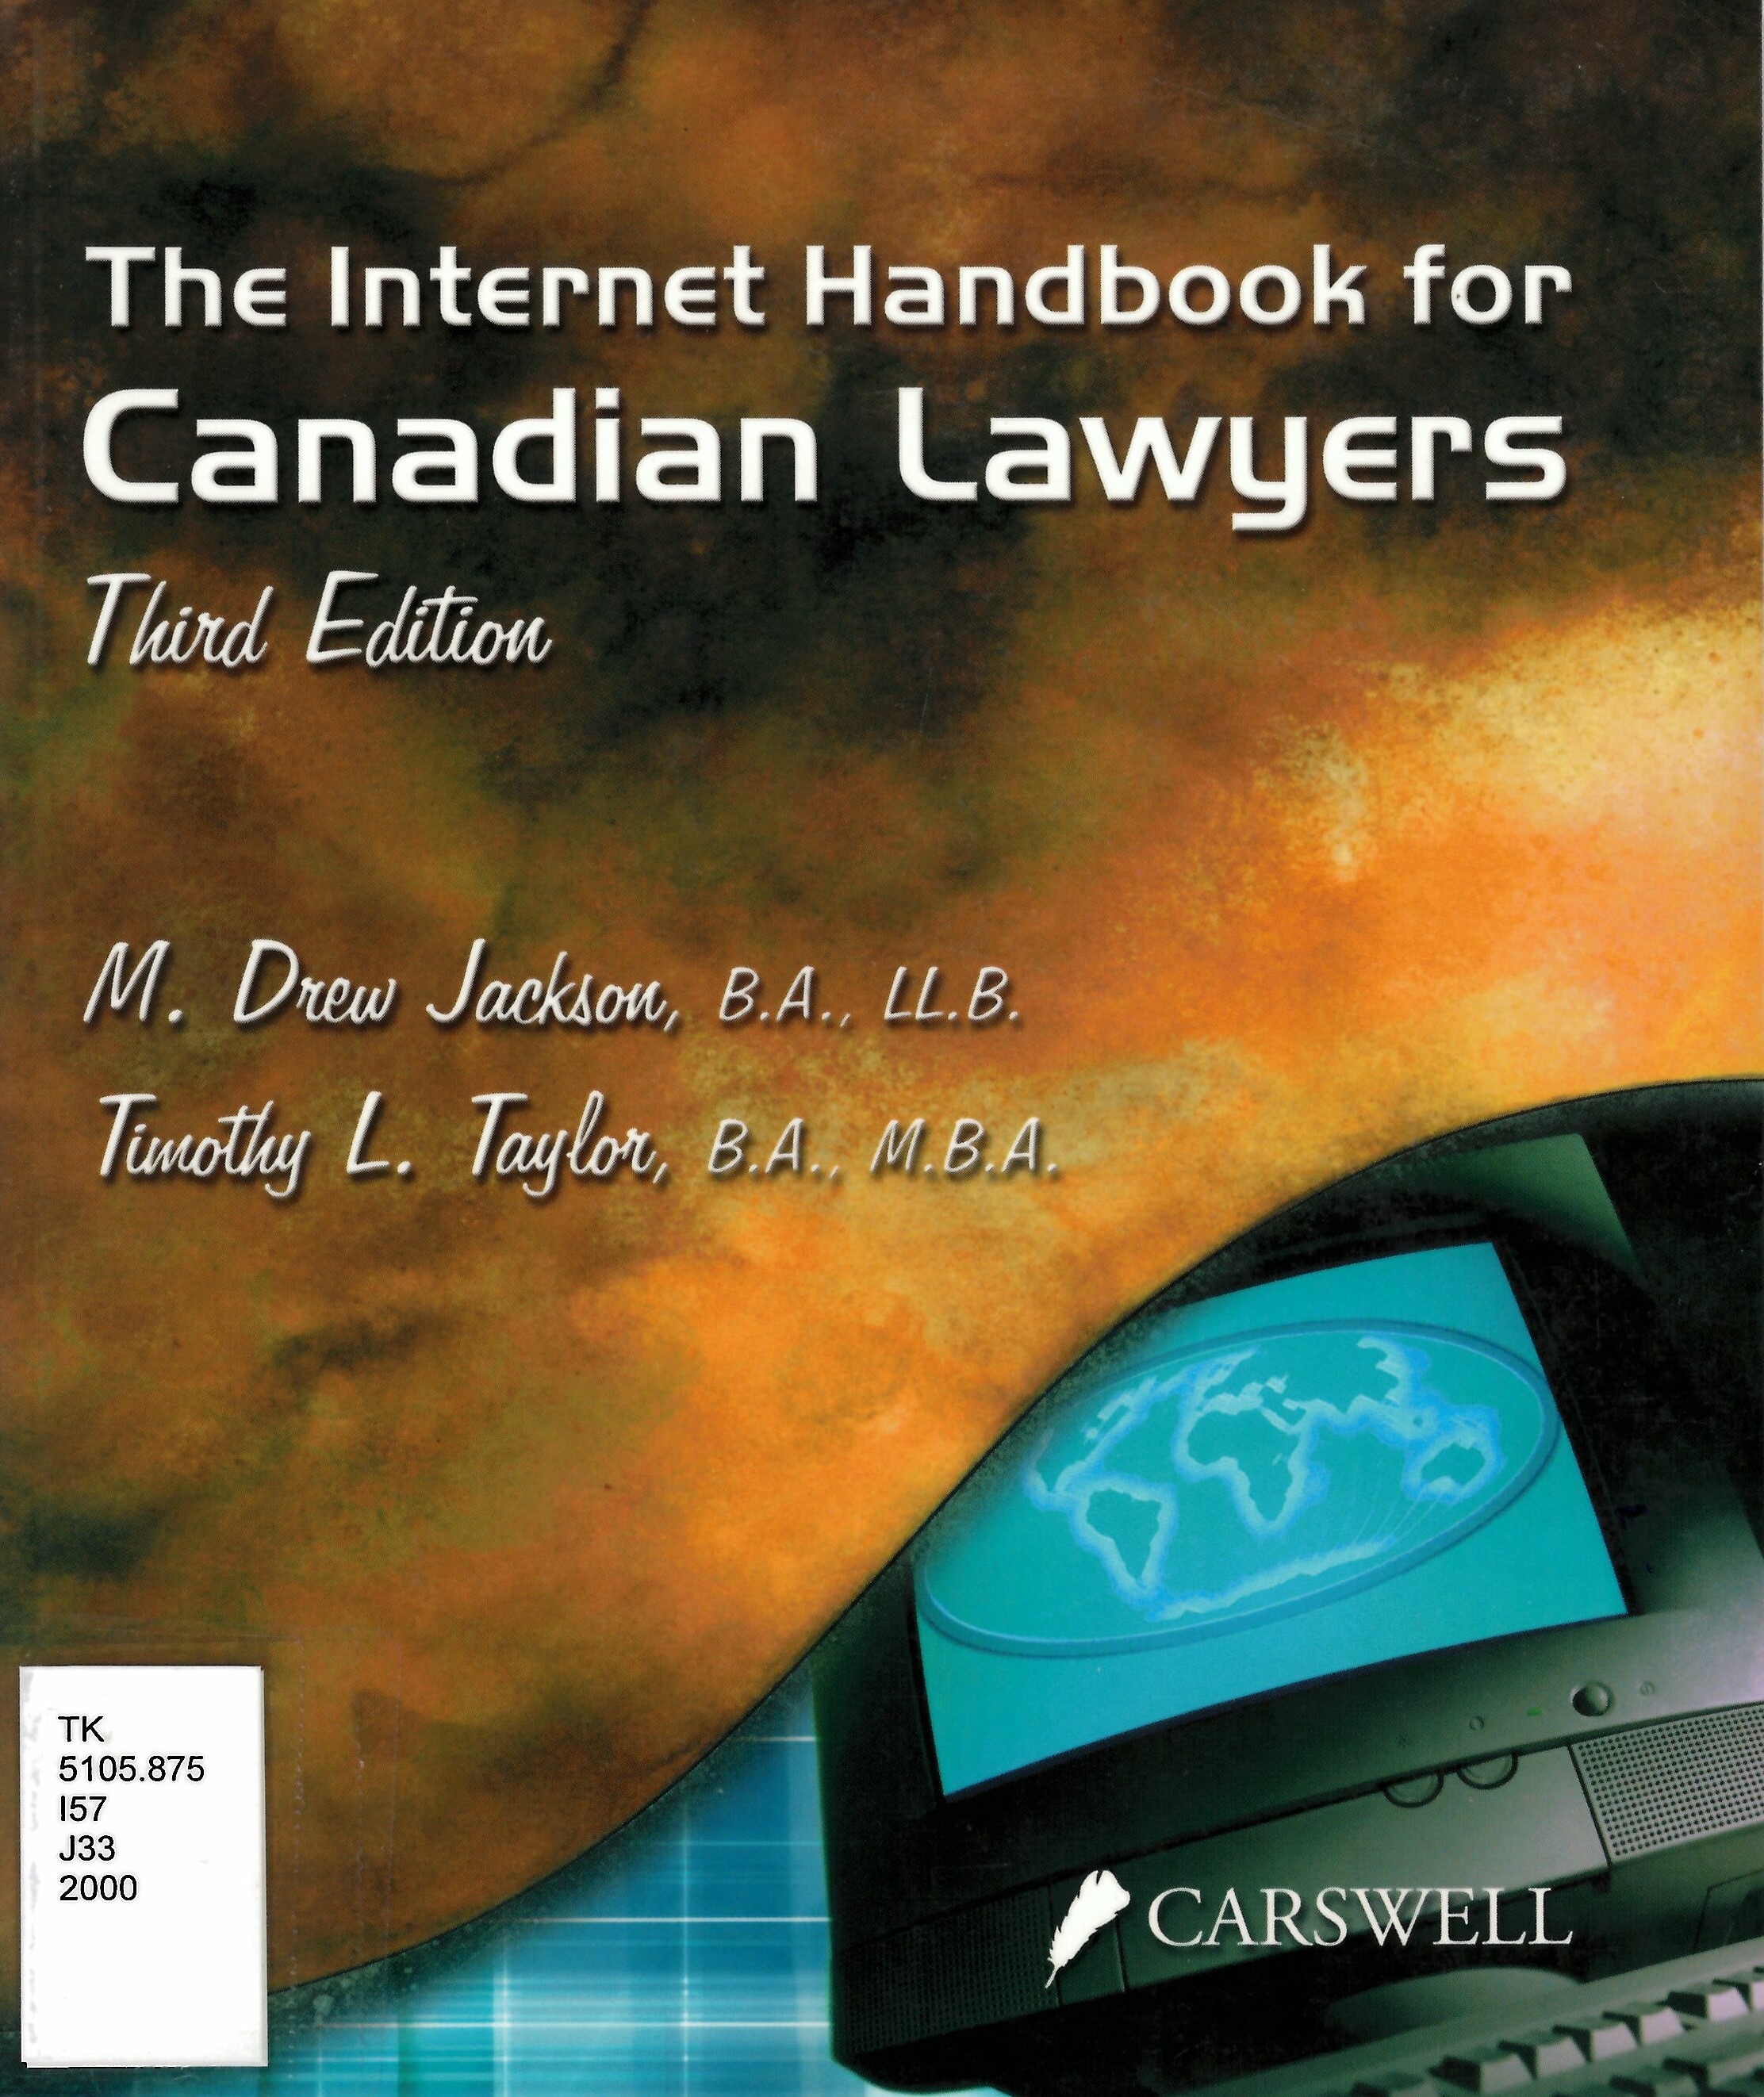 The Internet handbook for Canadian lawyers